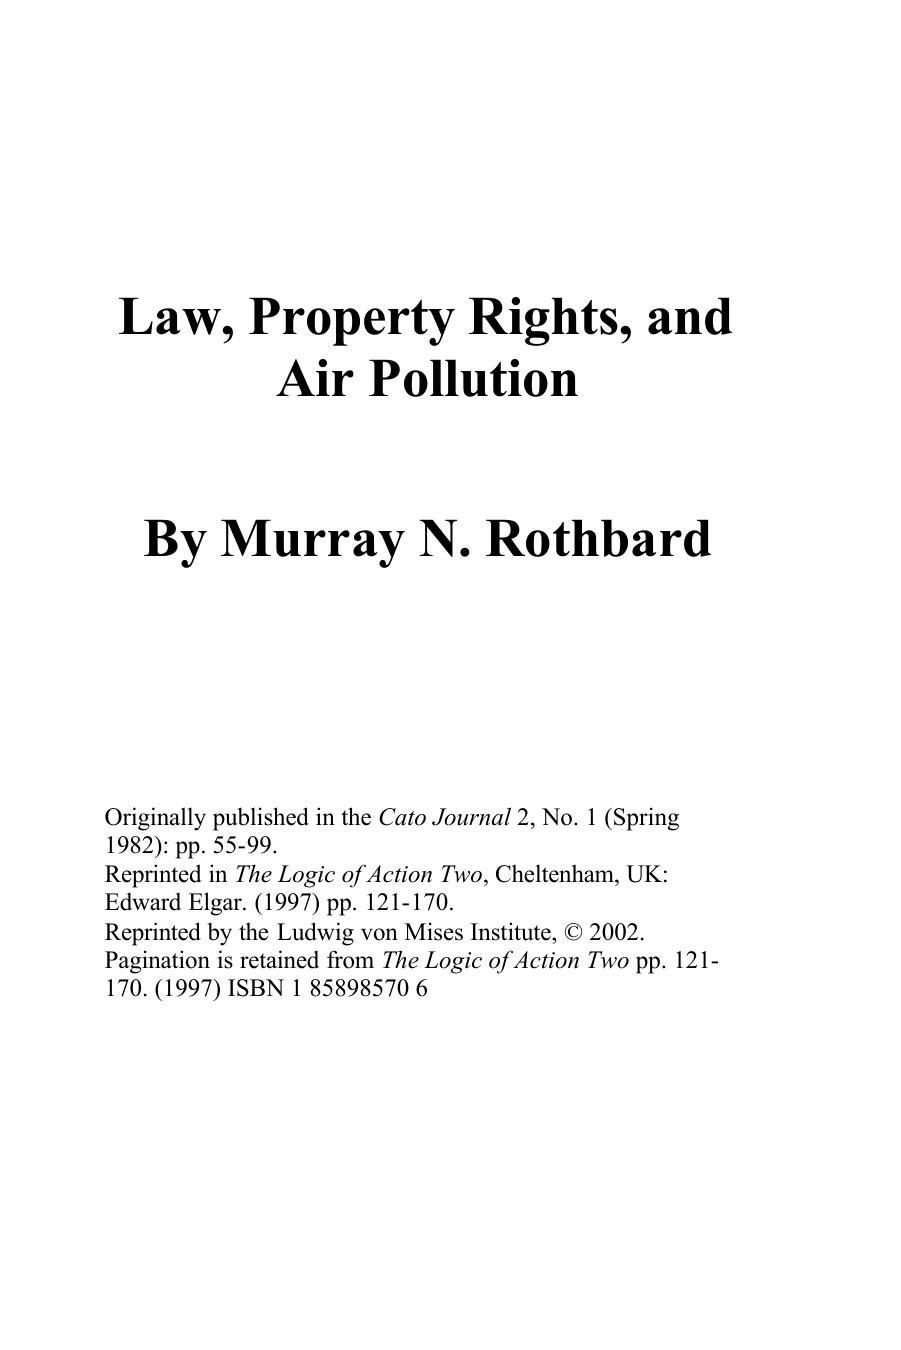 Law, Property Rights, and Air Pollution - Article